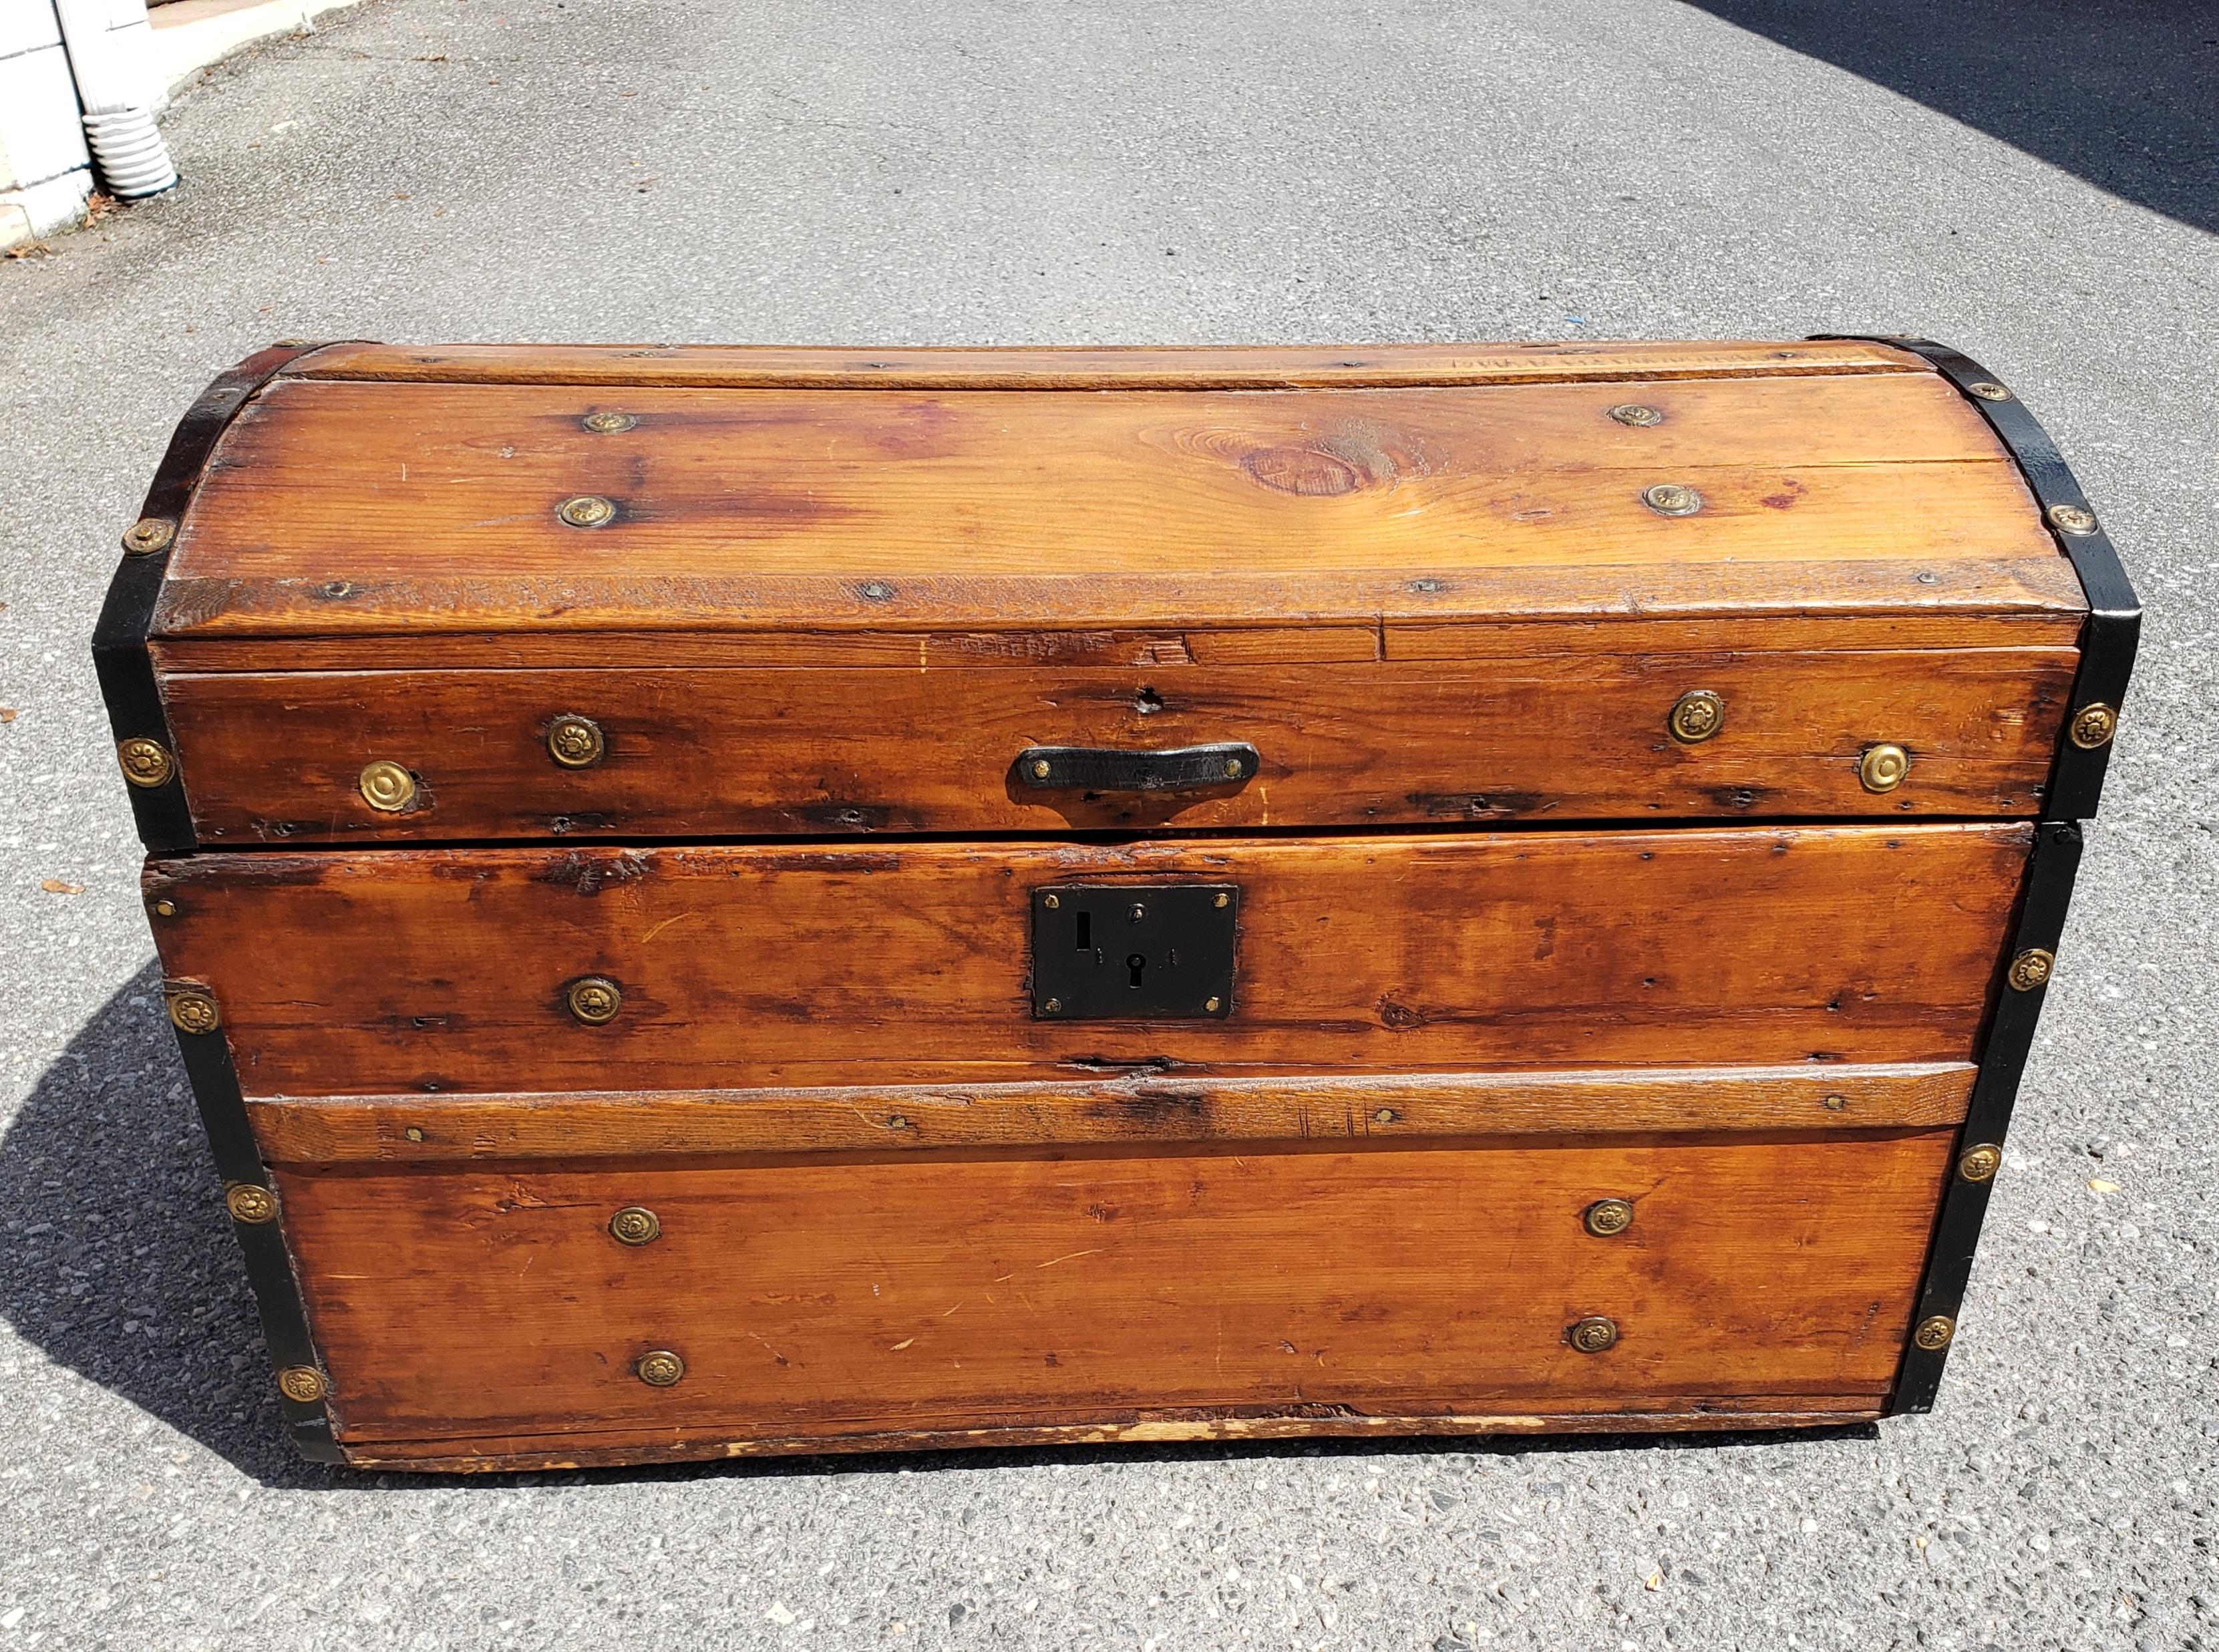 Early 20th Century American Rolling pine Blanket Trunk. Textile lined interior. Functional Leather handles.  Measures 30